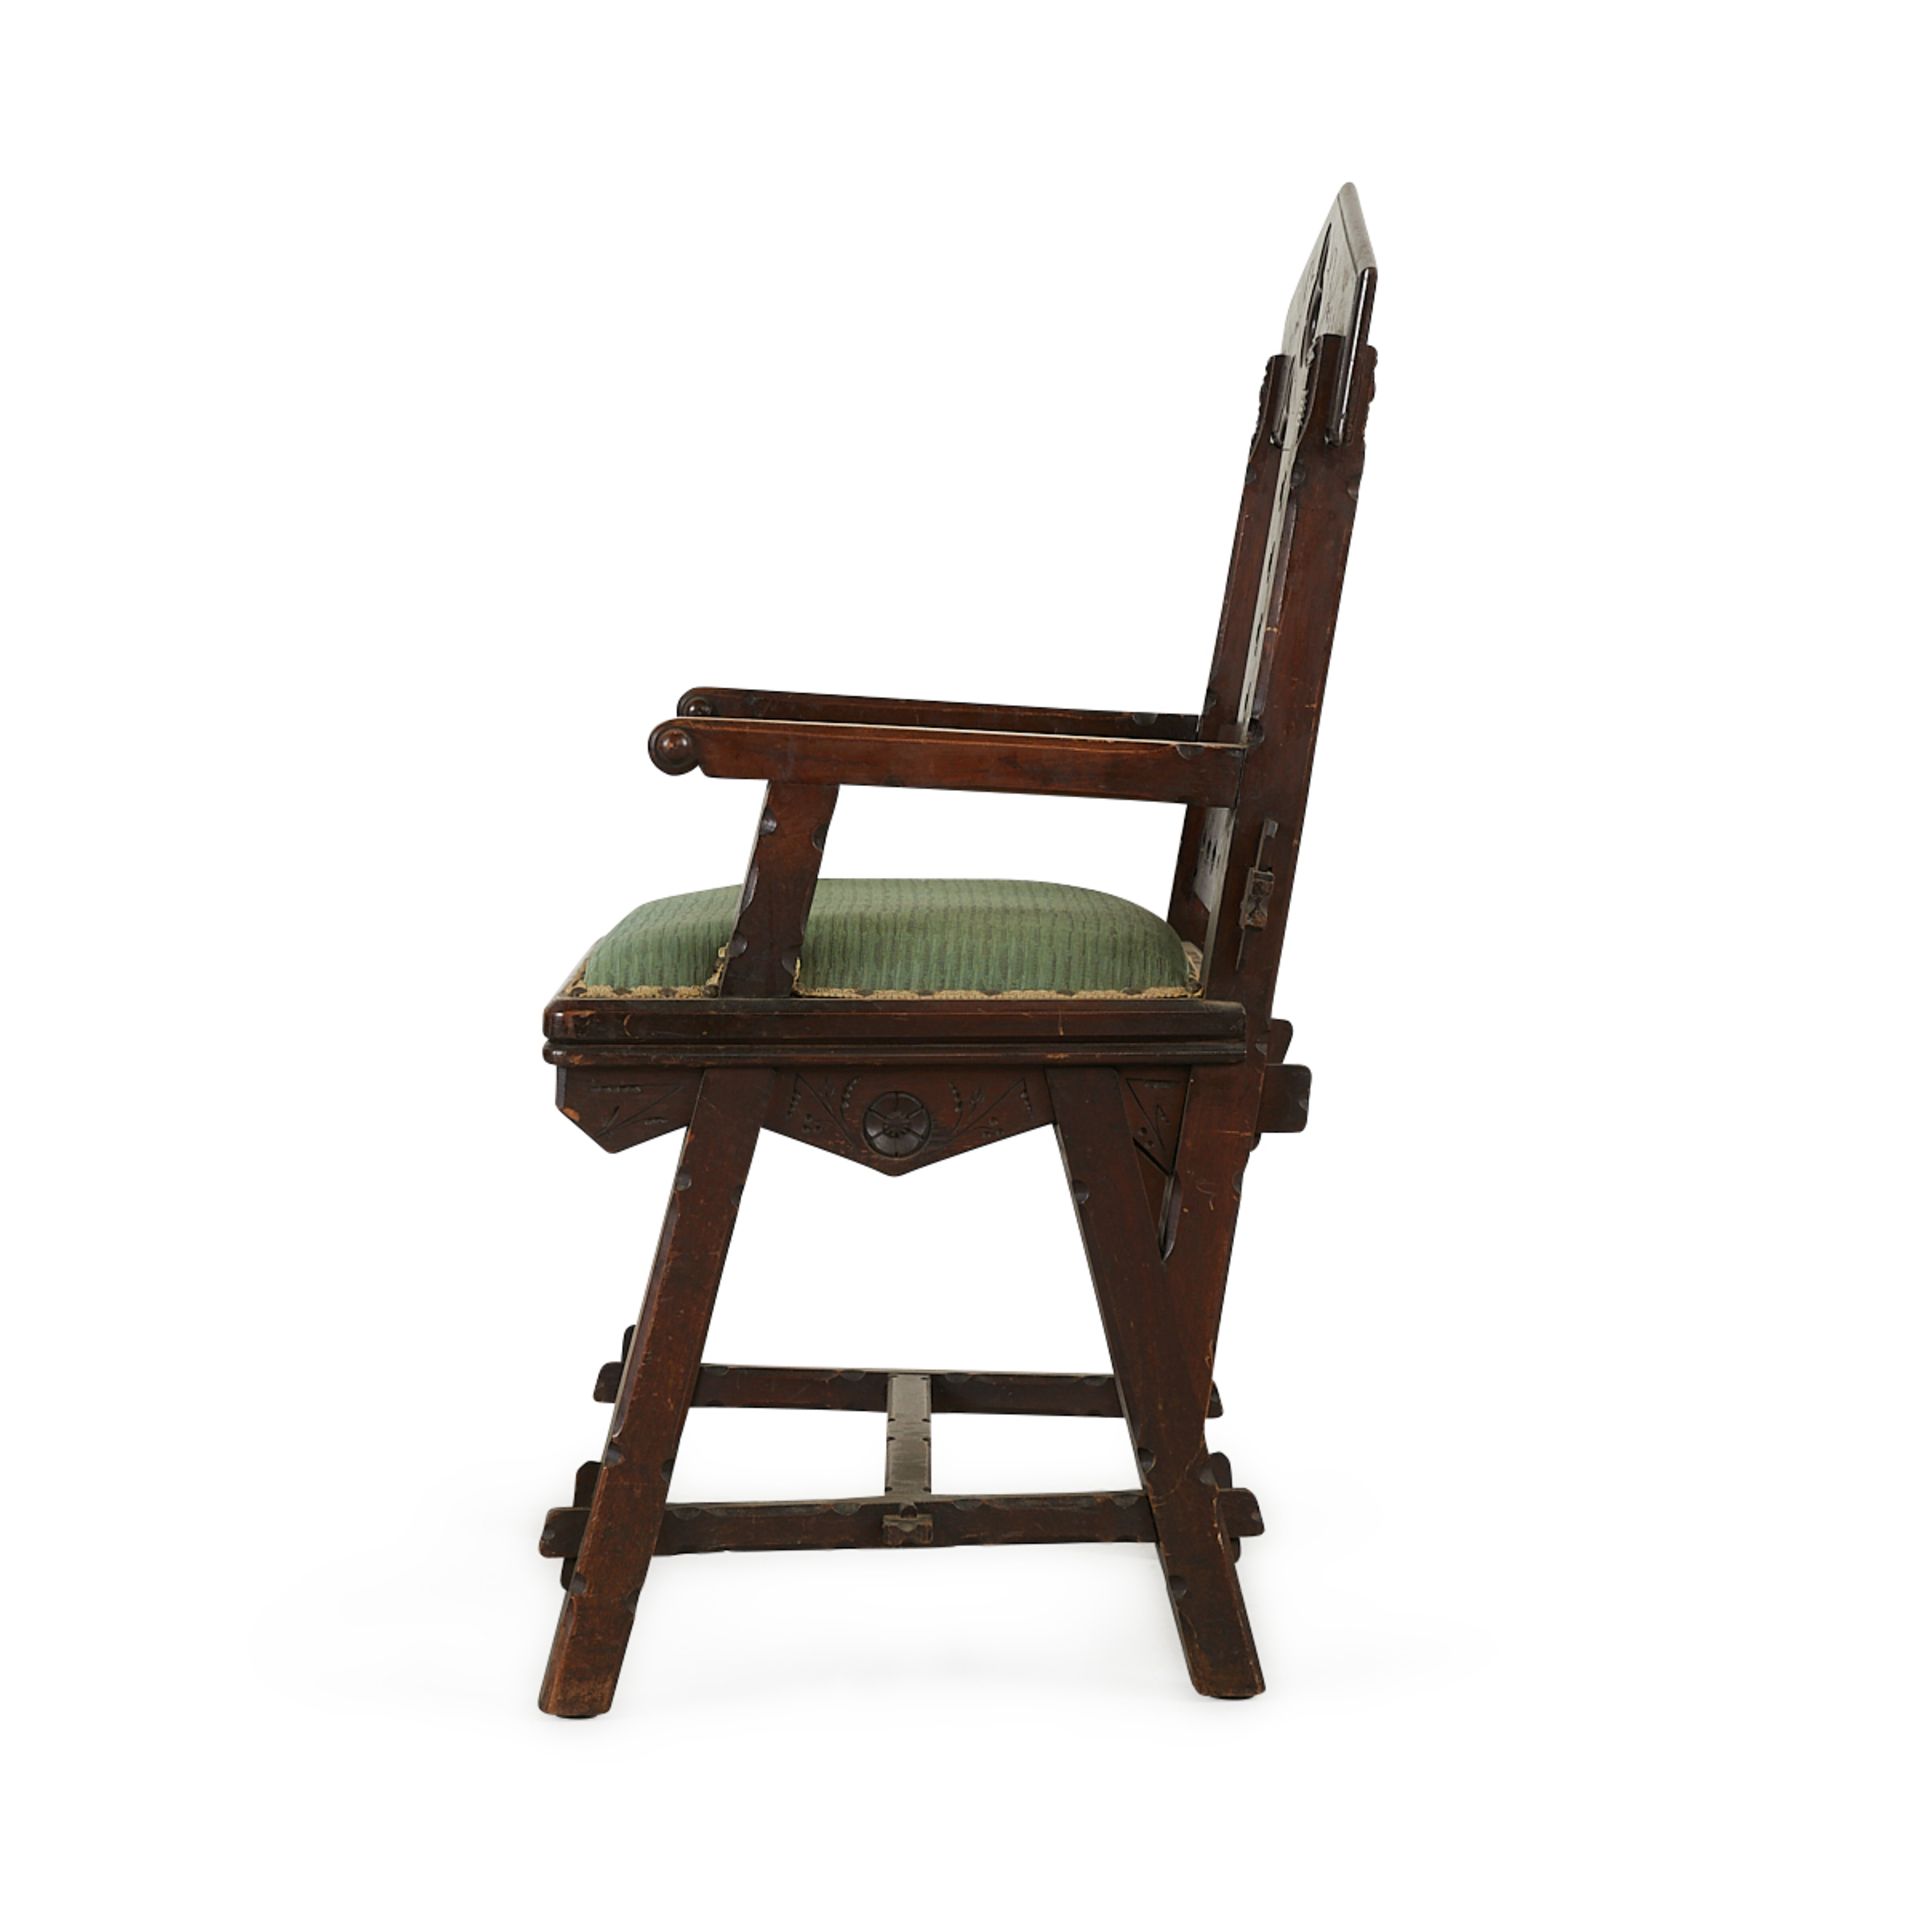 Aesthetic Movement Gothic Walnut Chair ca. 1875 - Image 4 of 11